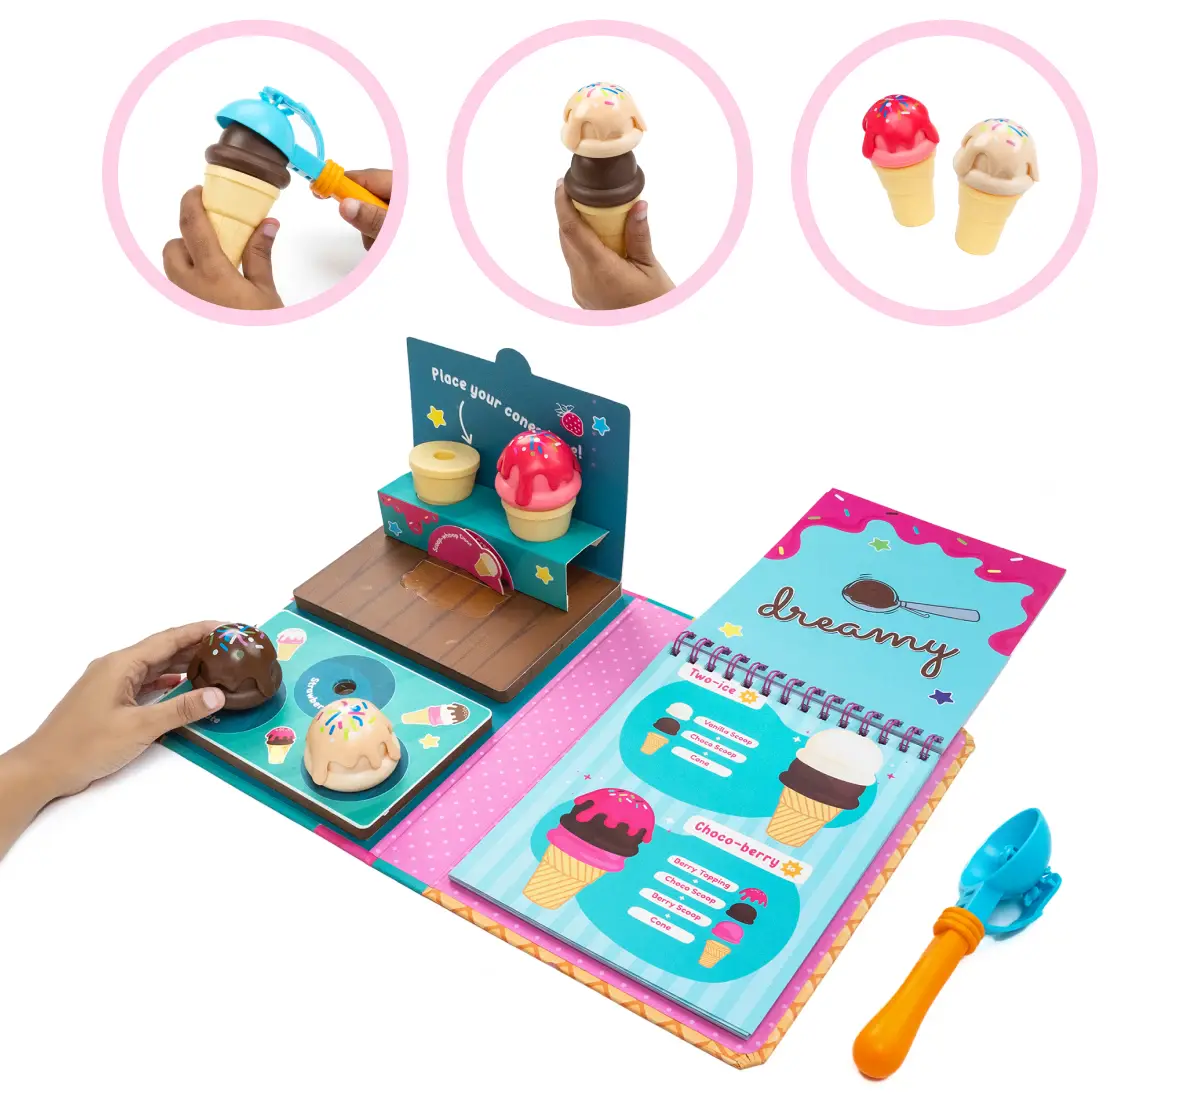 Dabble Pretend Play Ice-Cream Playset by Playshifu, Dream of Ice Cream, Ice Cream Toy, Kids for 3Y+, Multicolour